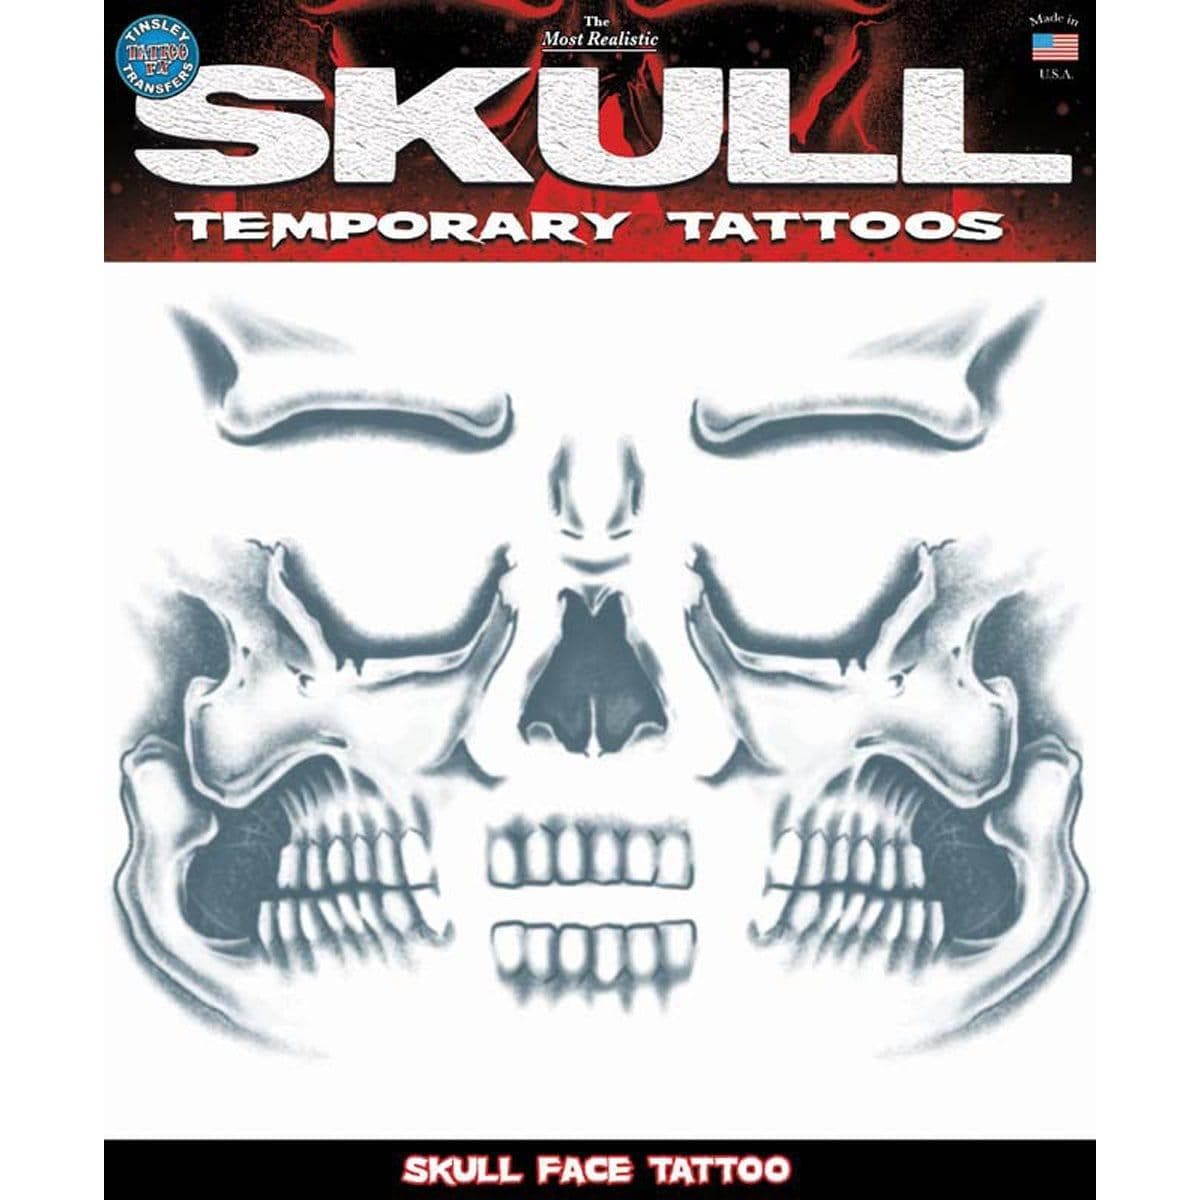 Buy Costume Accessories Skull face temporary tattoo sold at Party Expert